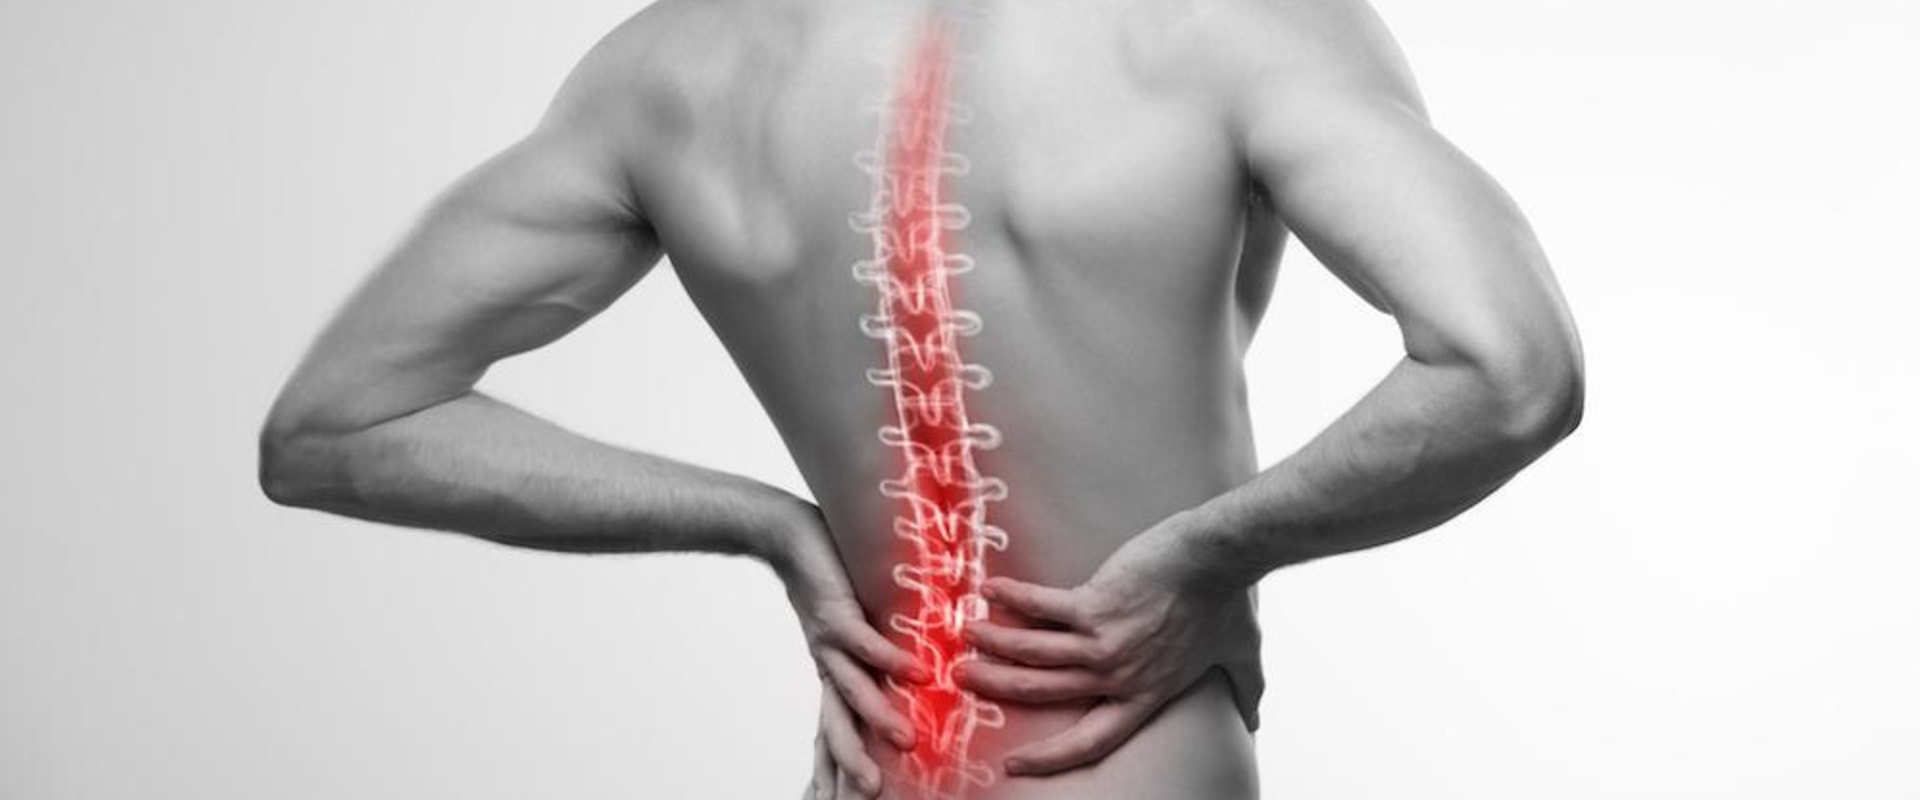 How long does stem cell therapy last for back pain?